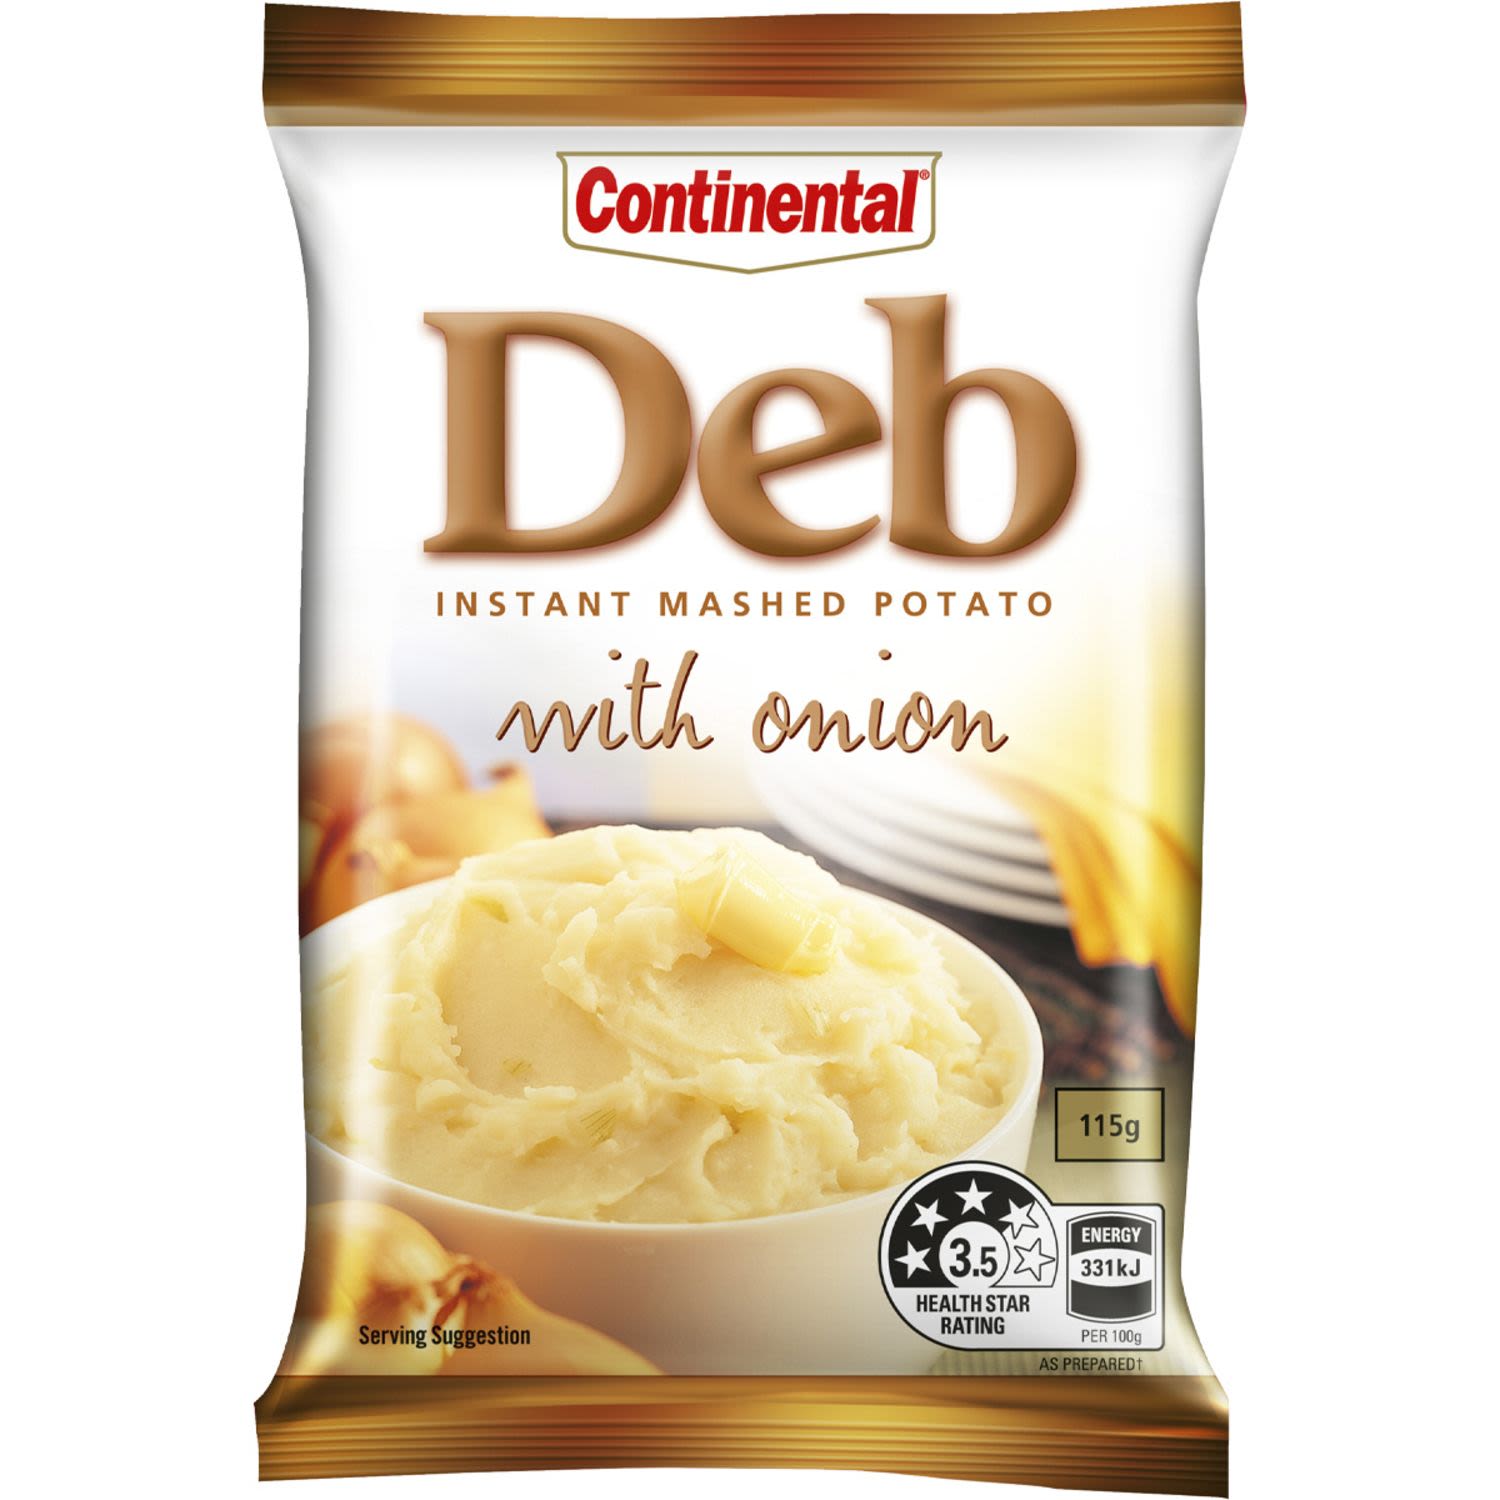 Continental Instant Mashed Potato Deb Mash With Onions, 115 Gram